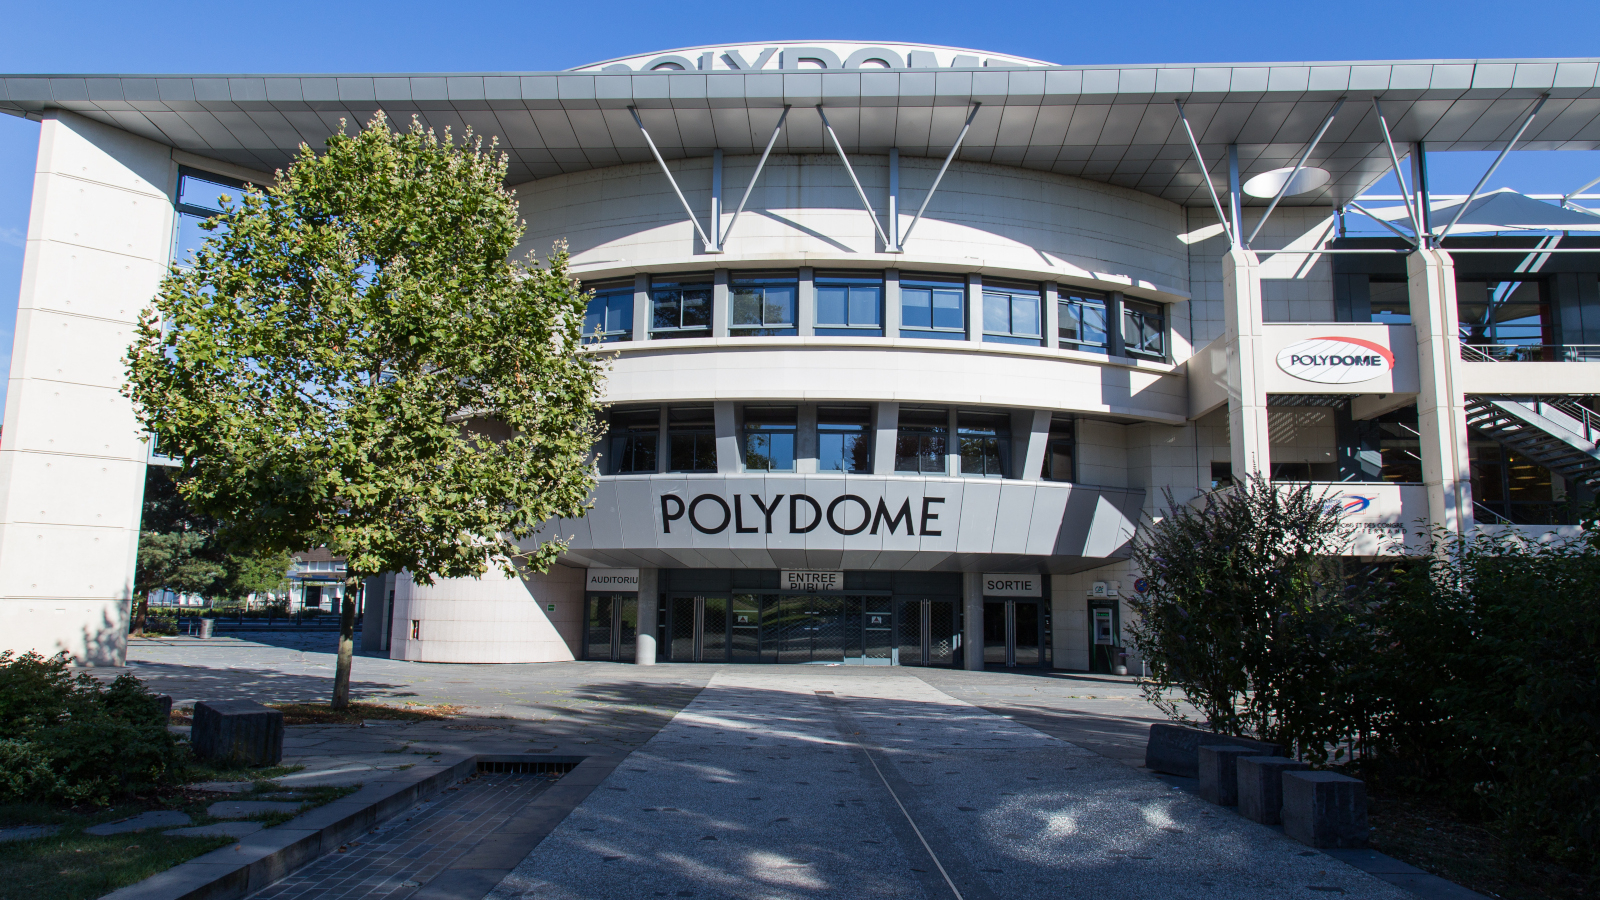 Polydome